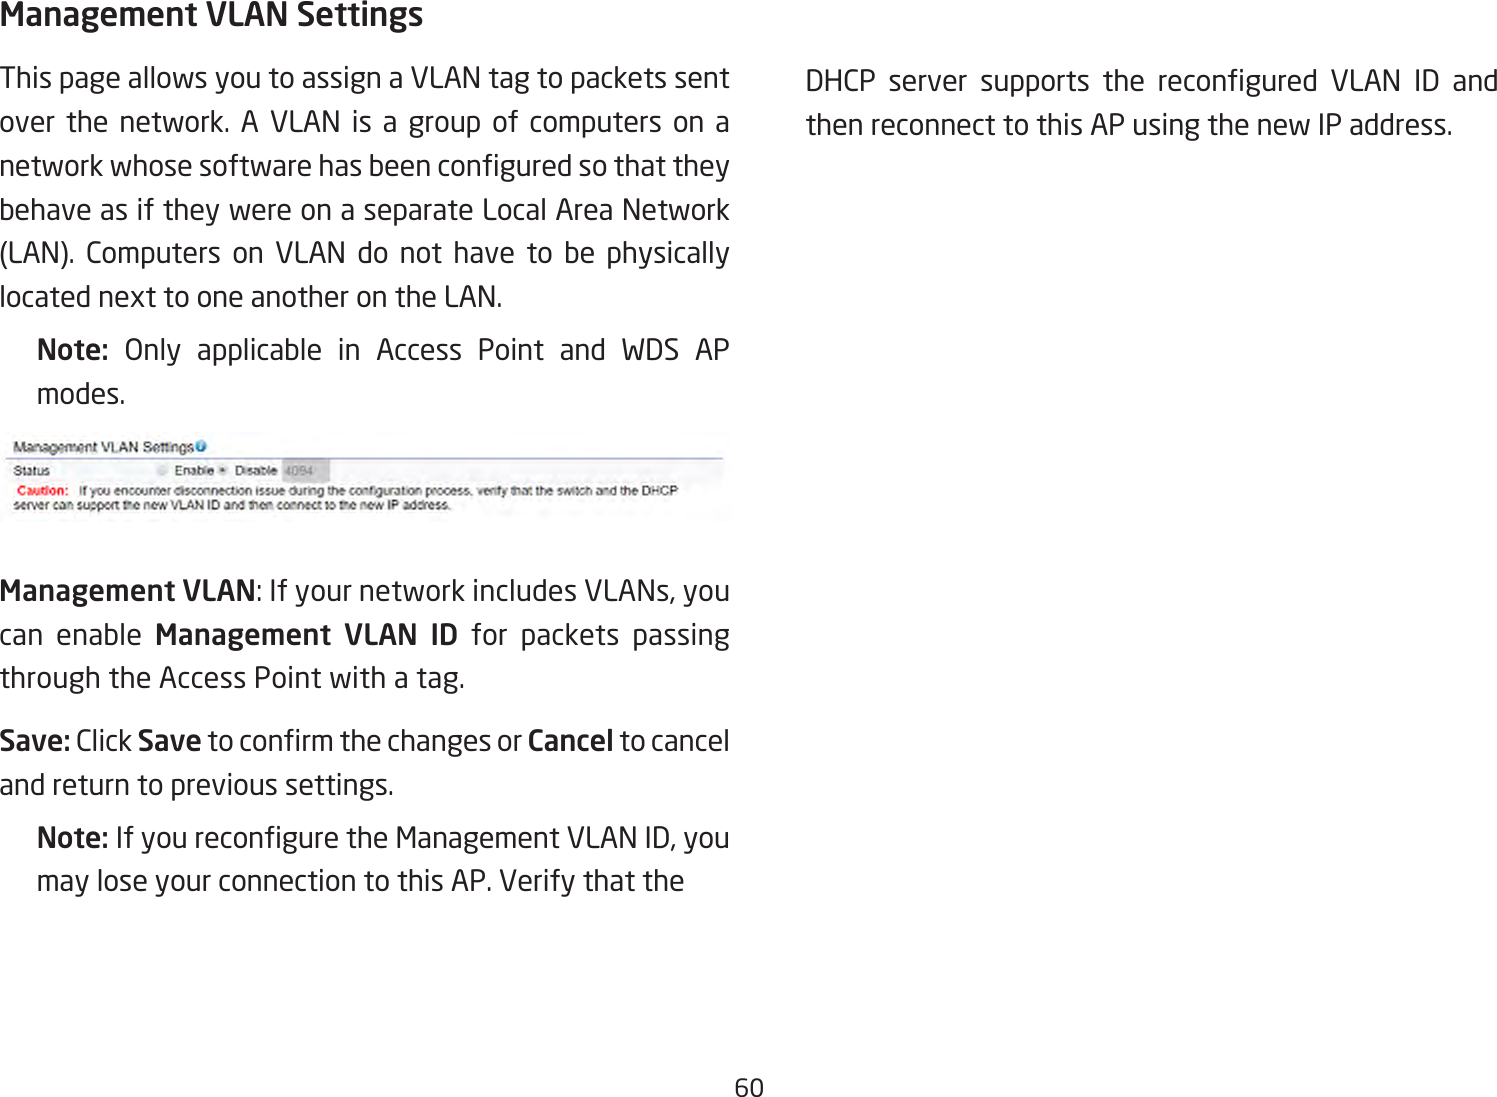 60Management VLAN SettingsThis page allows you to assign a VLAN tag to packets sent over the network. A VLAN is a group of computers on a networkwhosesoftwarehasbeenconguredsothattheybehave as if they were on a separate Local Area Network (LAN). Computers on VLAN do not have to be physicallylocatednexttooneanotherontheLAN.Note:  Only applicable in Access Point and WDS AP modes.Management VLAN:IfyournetworkincludesVLANs,youcan enable Management VLAN ID for packets passing through the Access Point with a tag. Save: Click SavetoconrmthechangesorCancel to cancel and return to previous settings.Note: IfyoureconguretheManagementVLANID,youmay lose your connection to this AP. Verify that the   DHCP server supports the recongured VLAN ID andthen reconnect to this AP using the new IP address. 